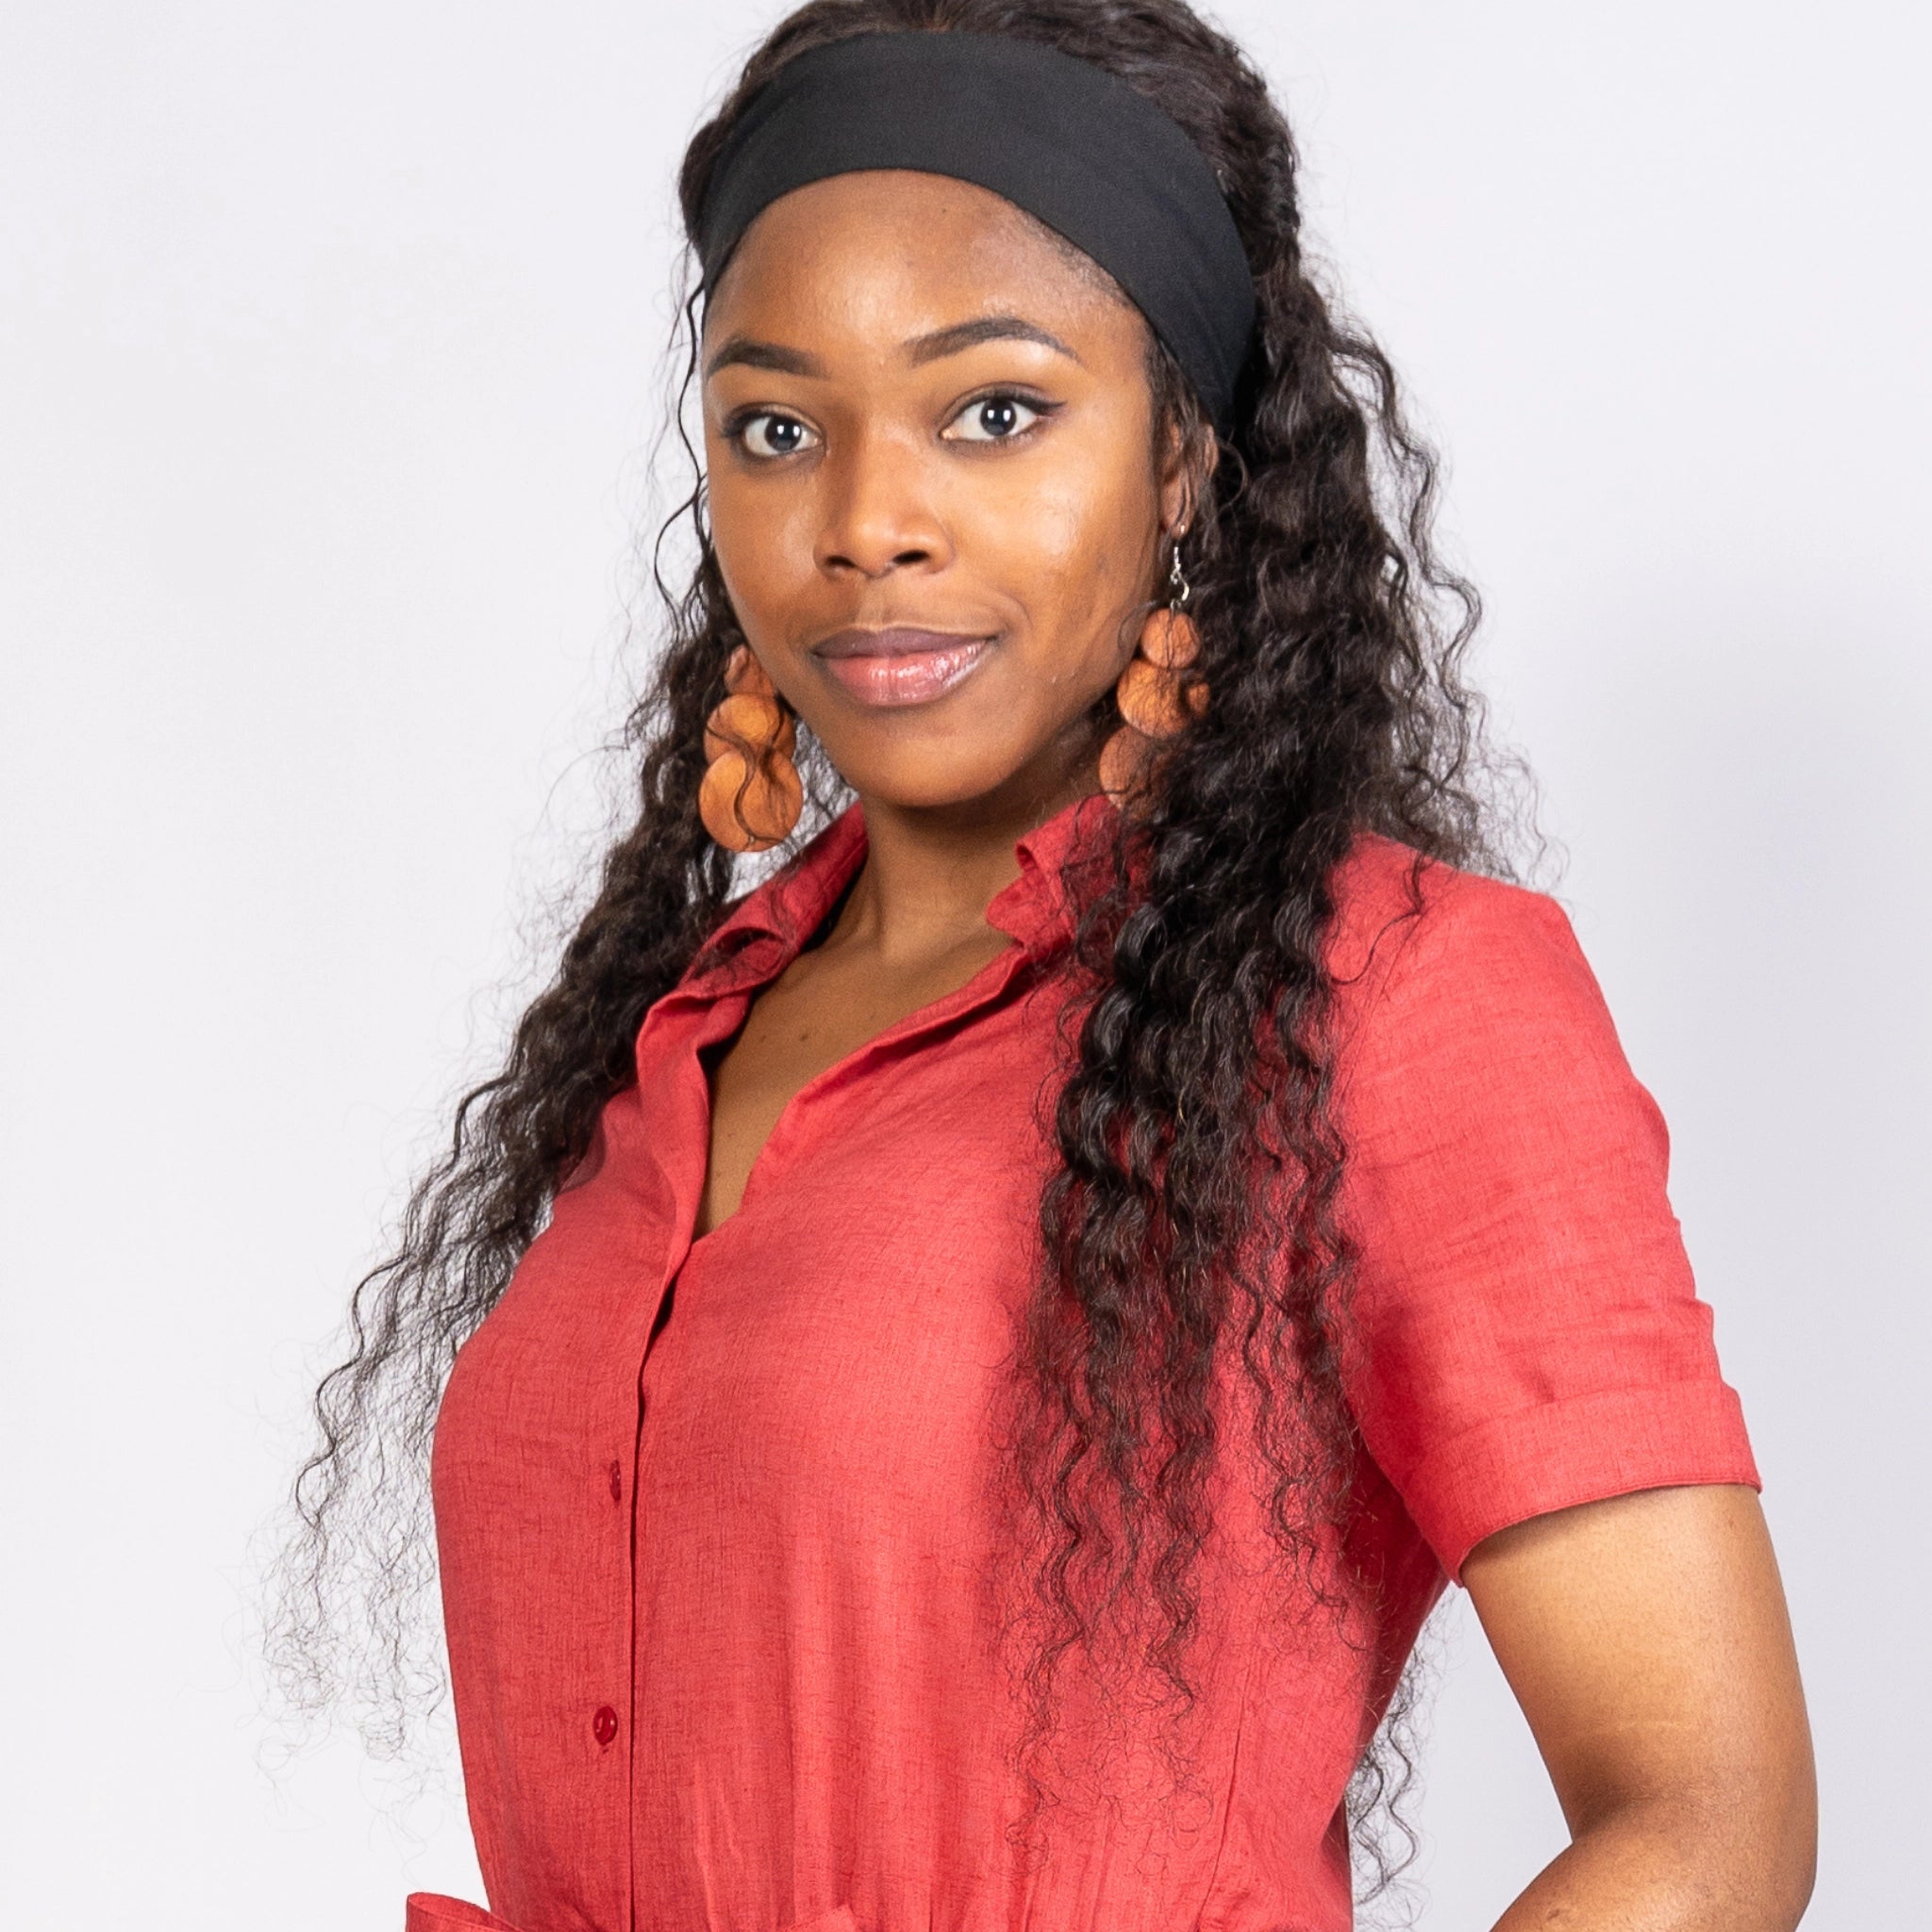 A woman in a Karee Milano Red Serenity Viscose Linen Jumpsuit and black headband, with long curly hair and large circular earrings, stands confidently against a gray background.